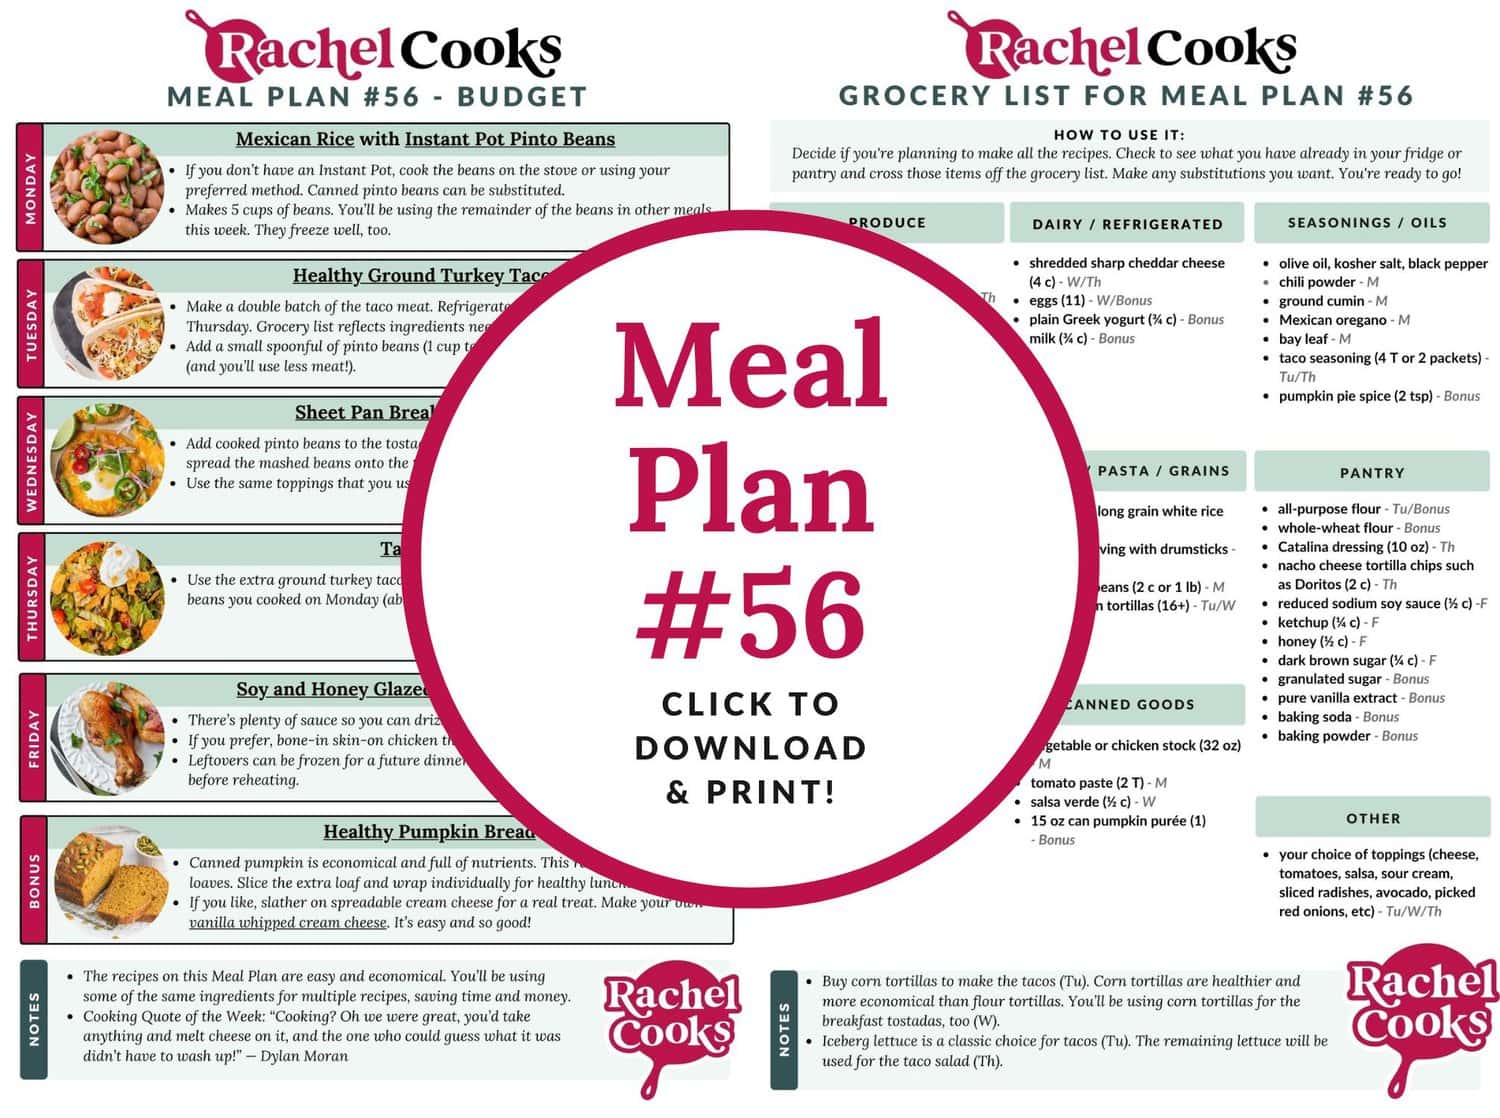 Meal Plan 56 preview image, showing both pages.